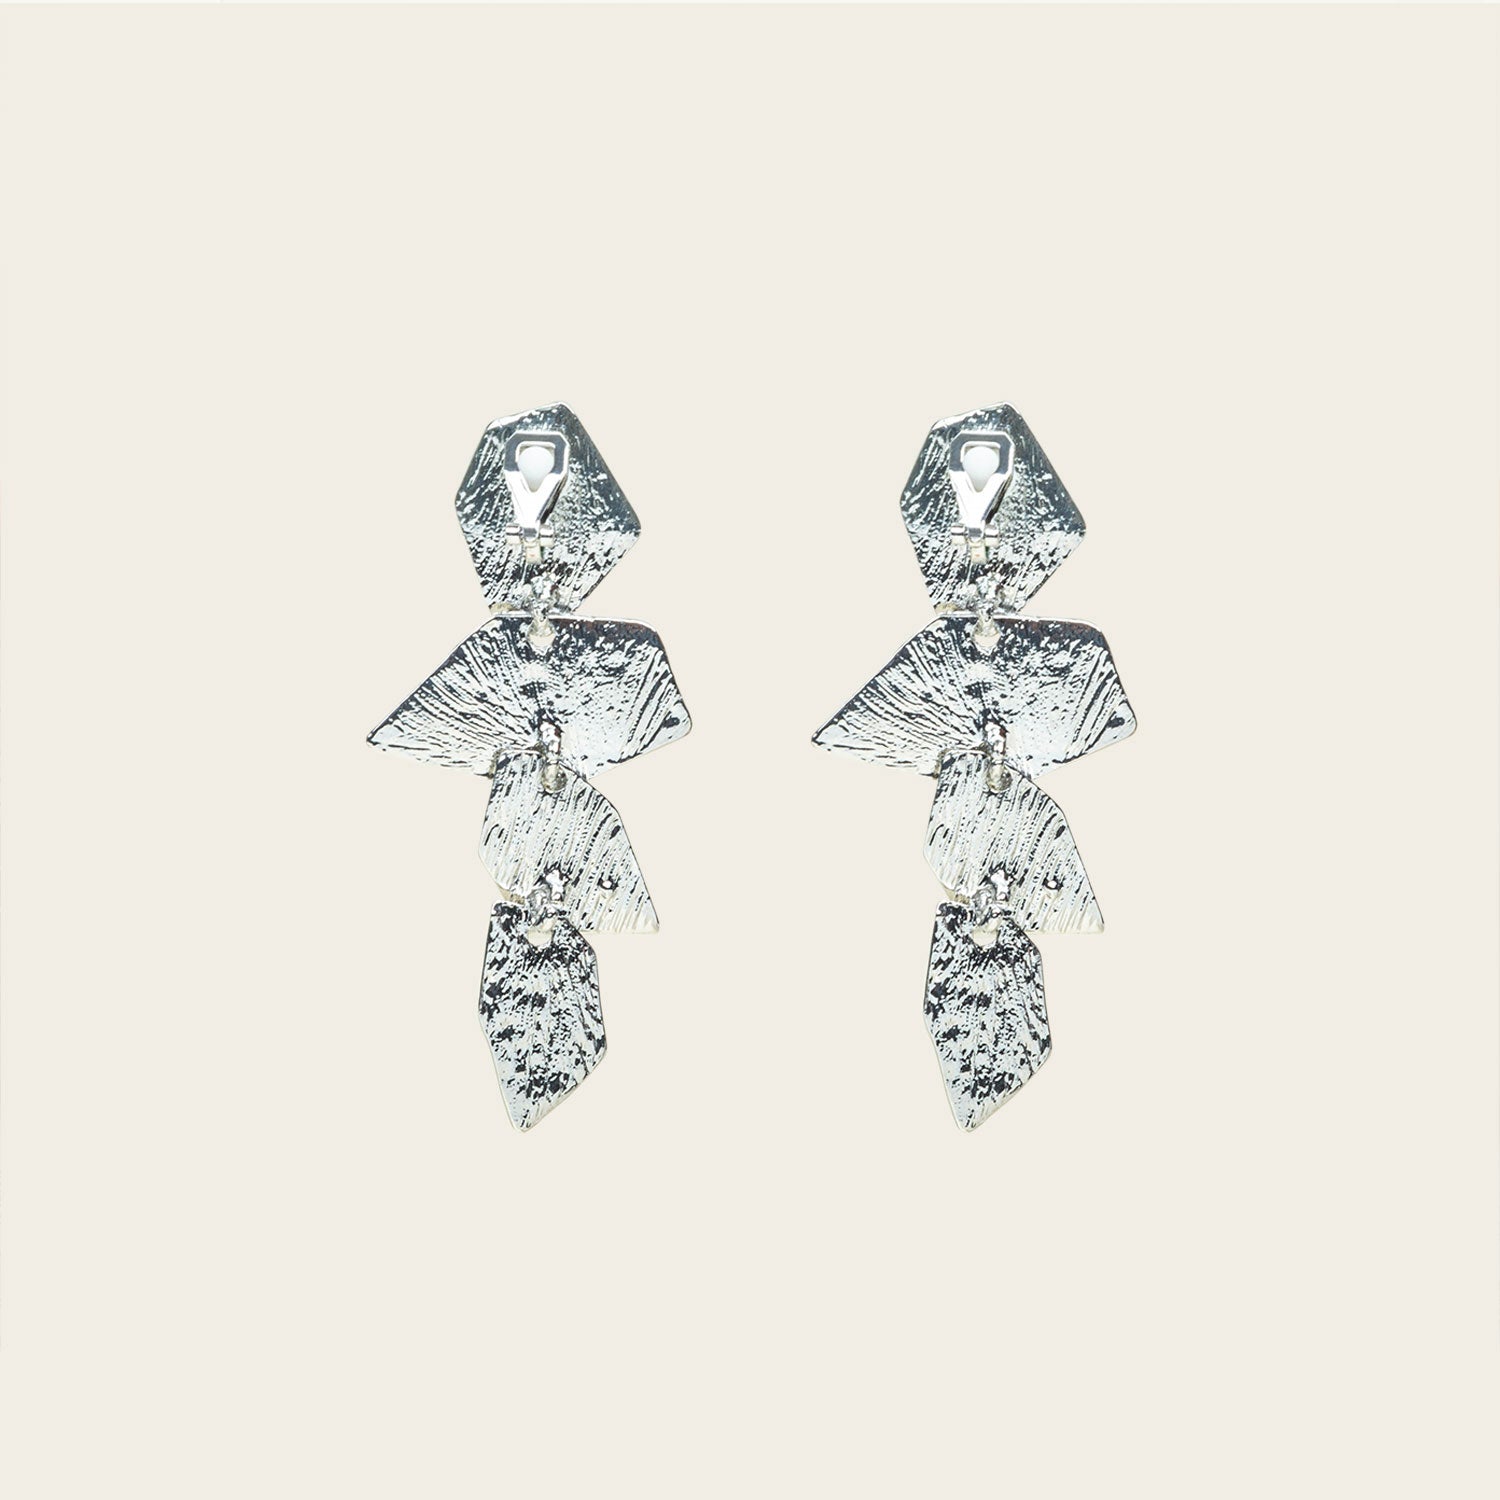 Image of the Manhattan Drop Clip On Earrings in Silver provide a secure and comfortable fit for any ear type. The padded clip-on design features a zinc and copper alloy construction, and lasts approximately 8-12 hours. As the earring pairs are non-adjustable, each purchase contains a single pair.